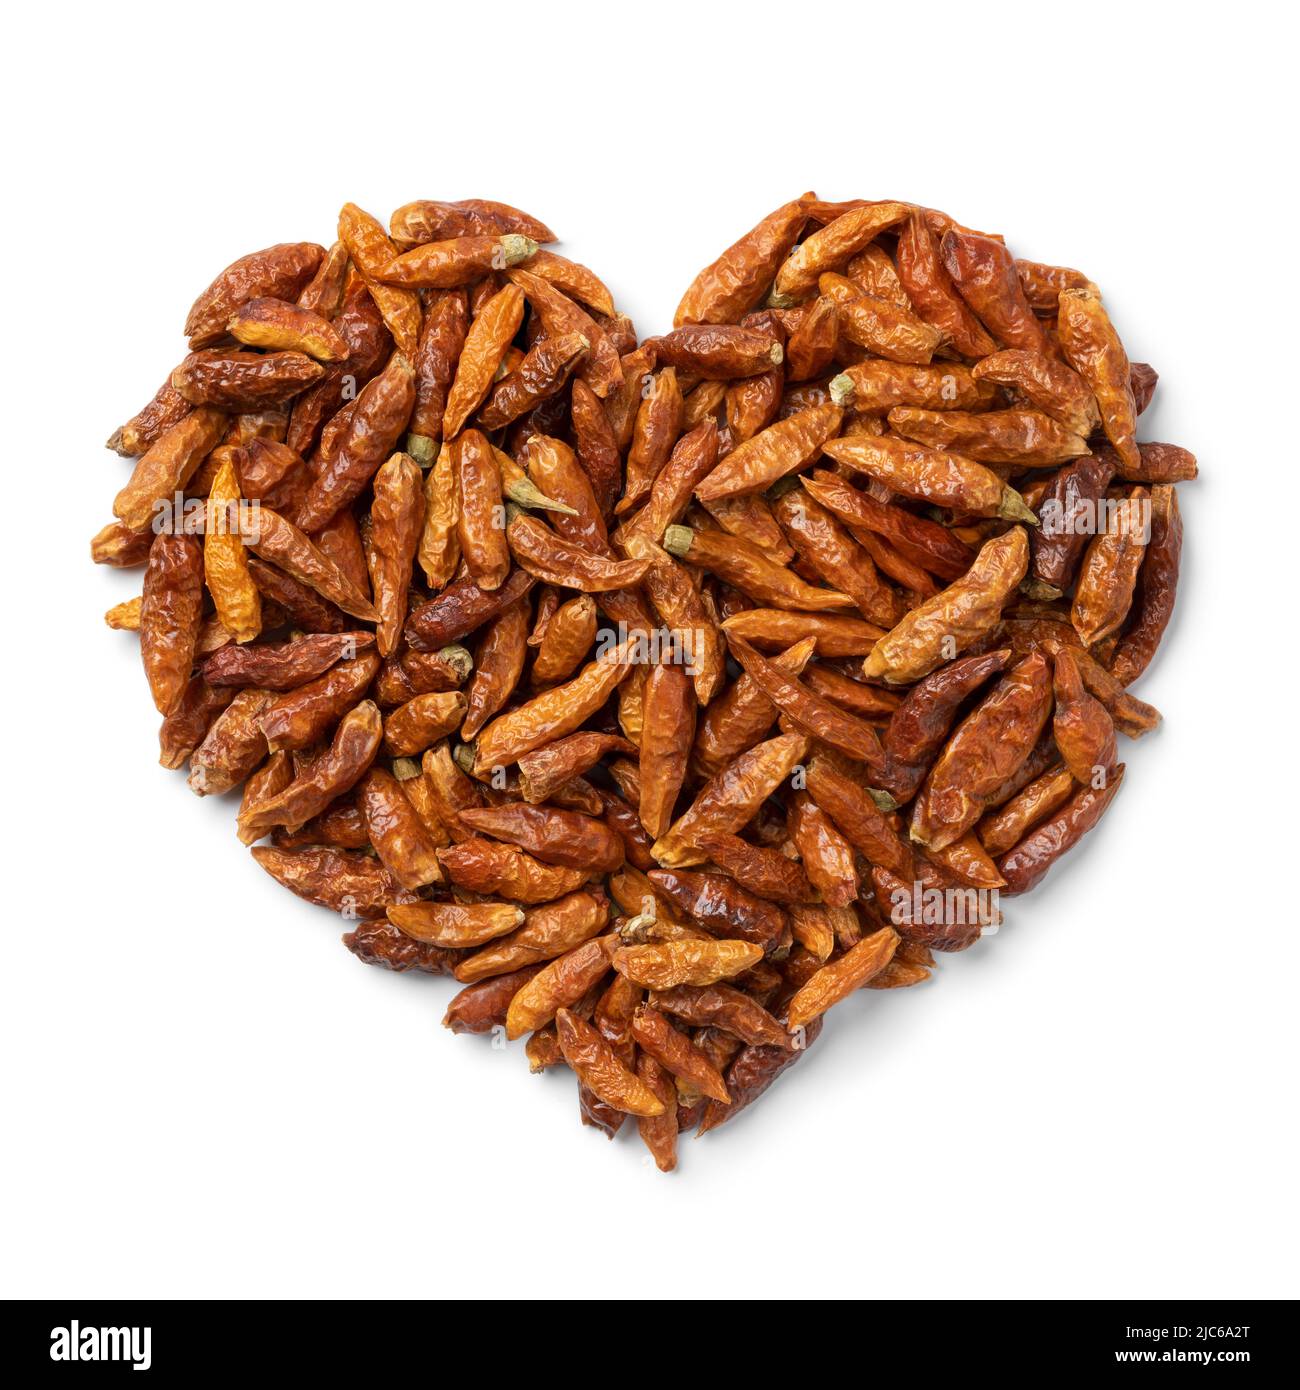 Dried chili peppers in heart shape isolated on white background close up Stock Photo